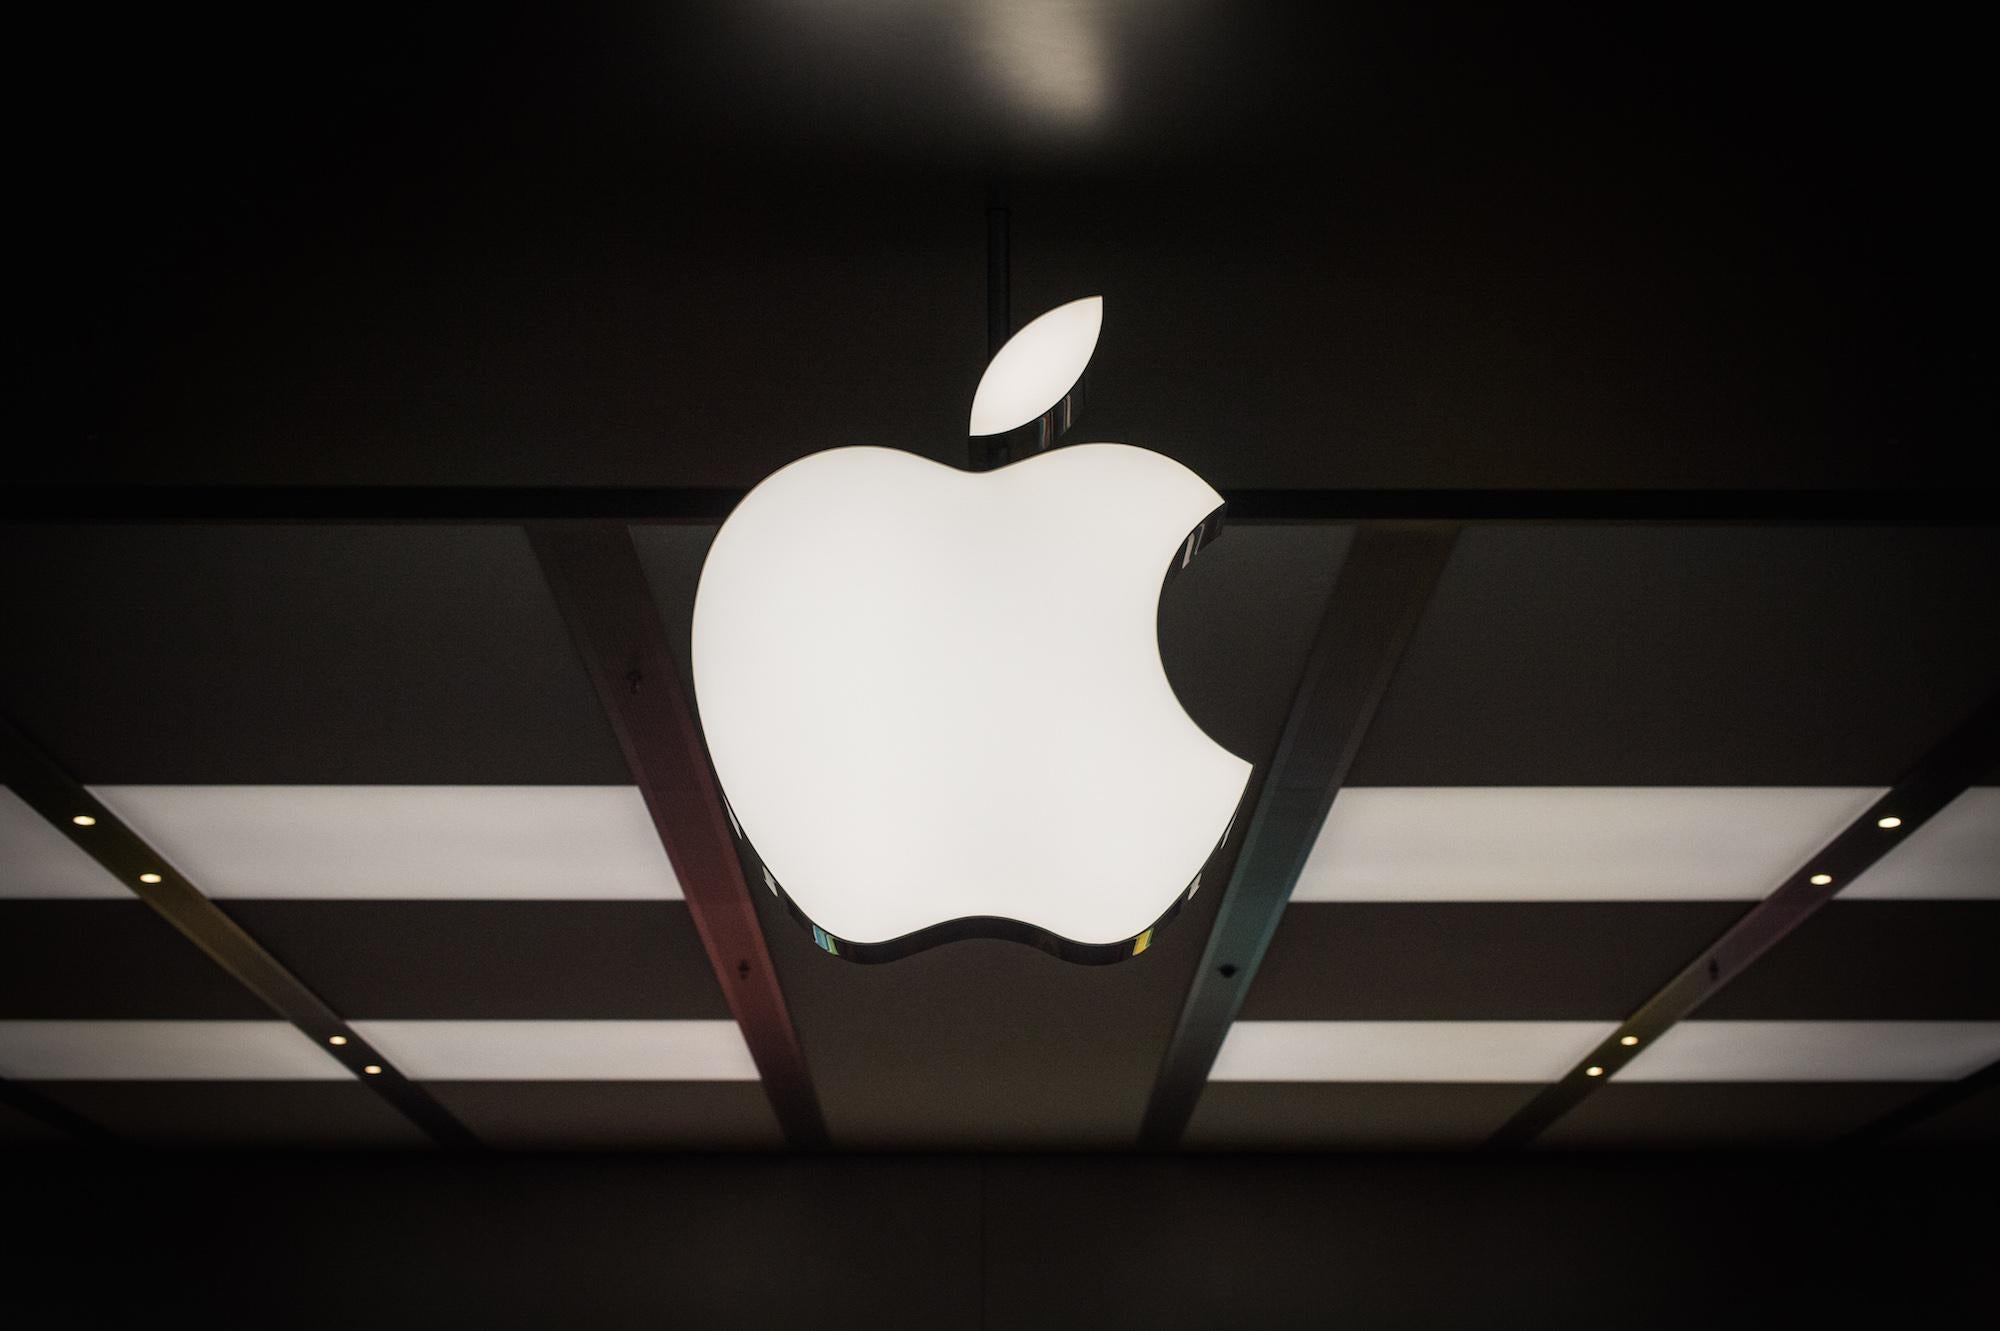 The famous Apple logo is shown.